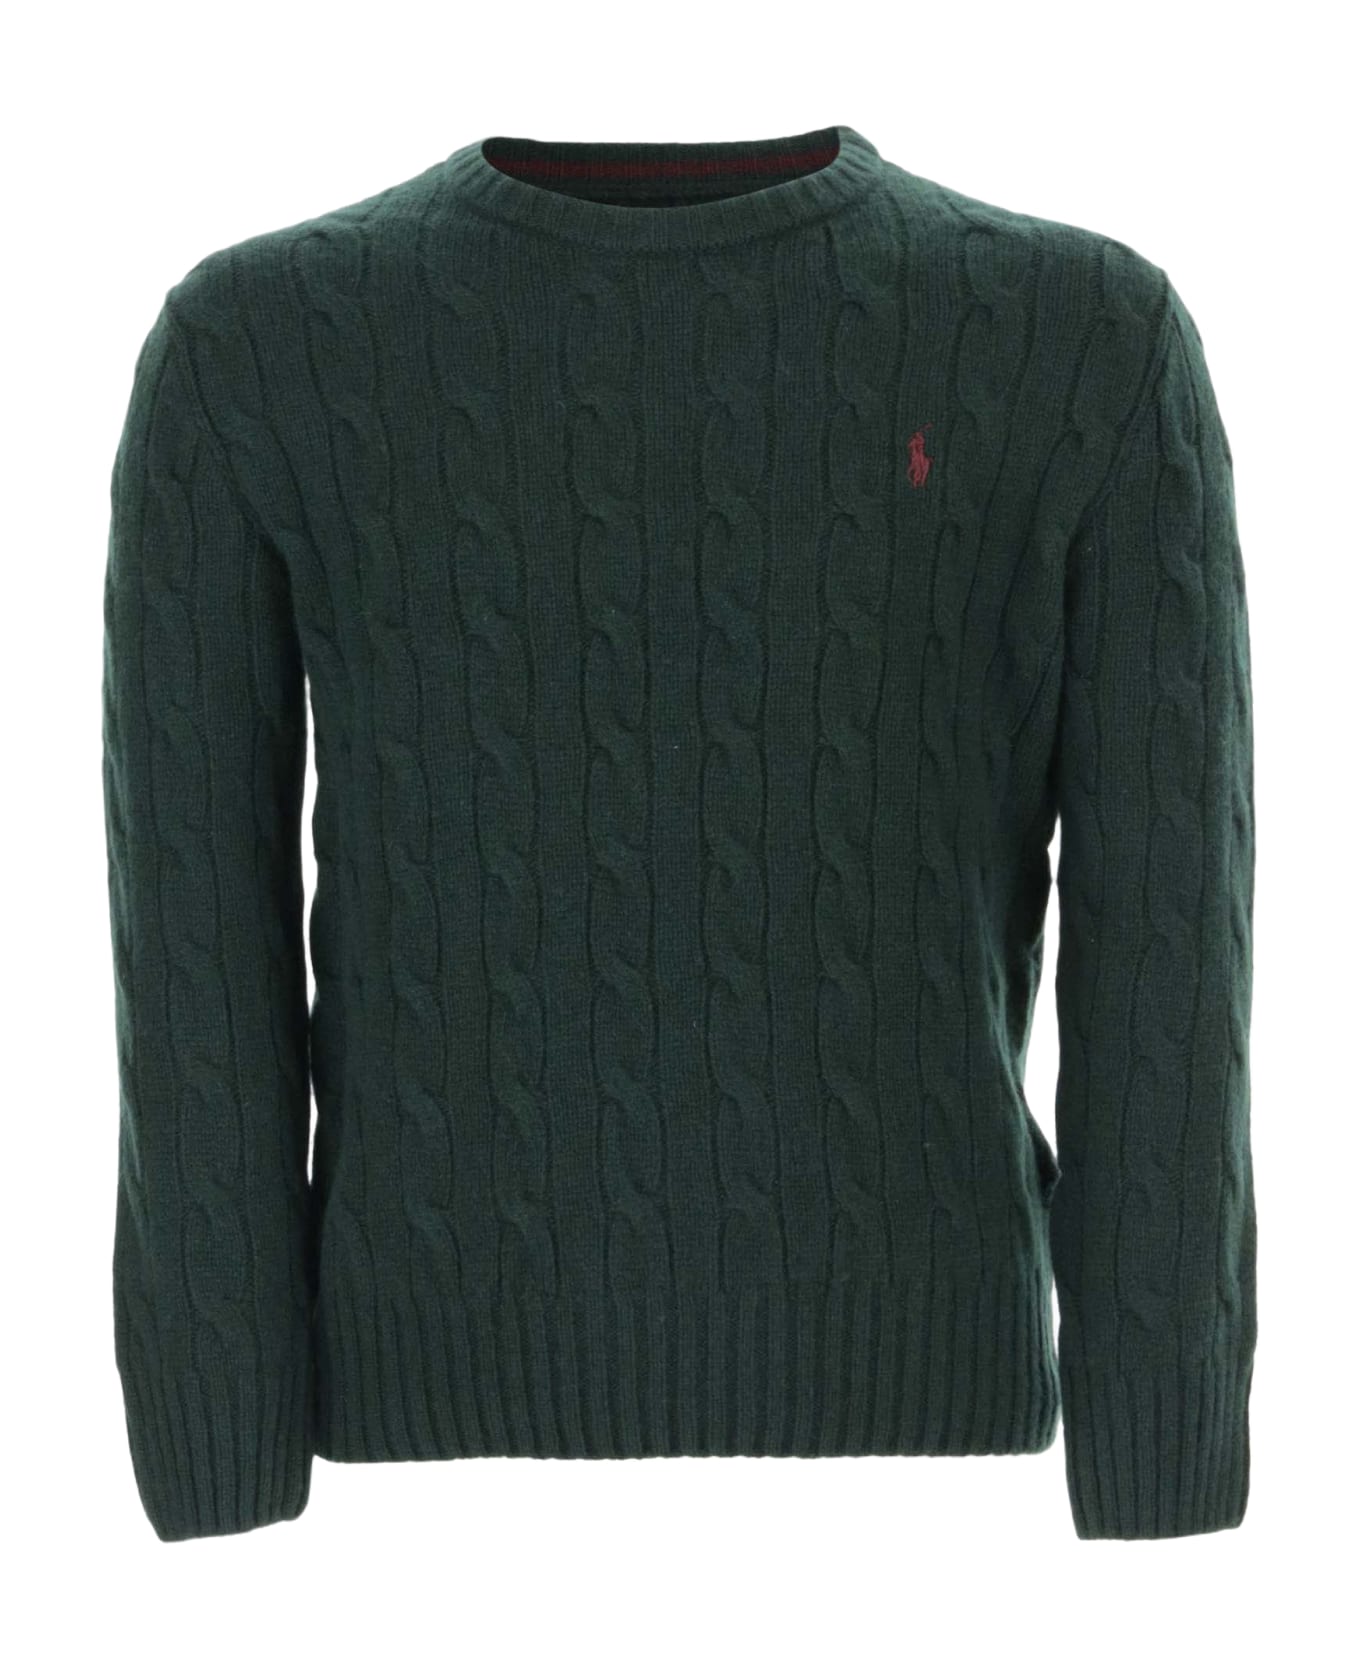 Ralph Lauren Wool And Cashmere Sweater - Moss Agate